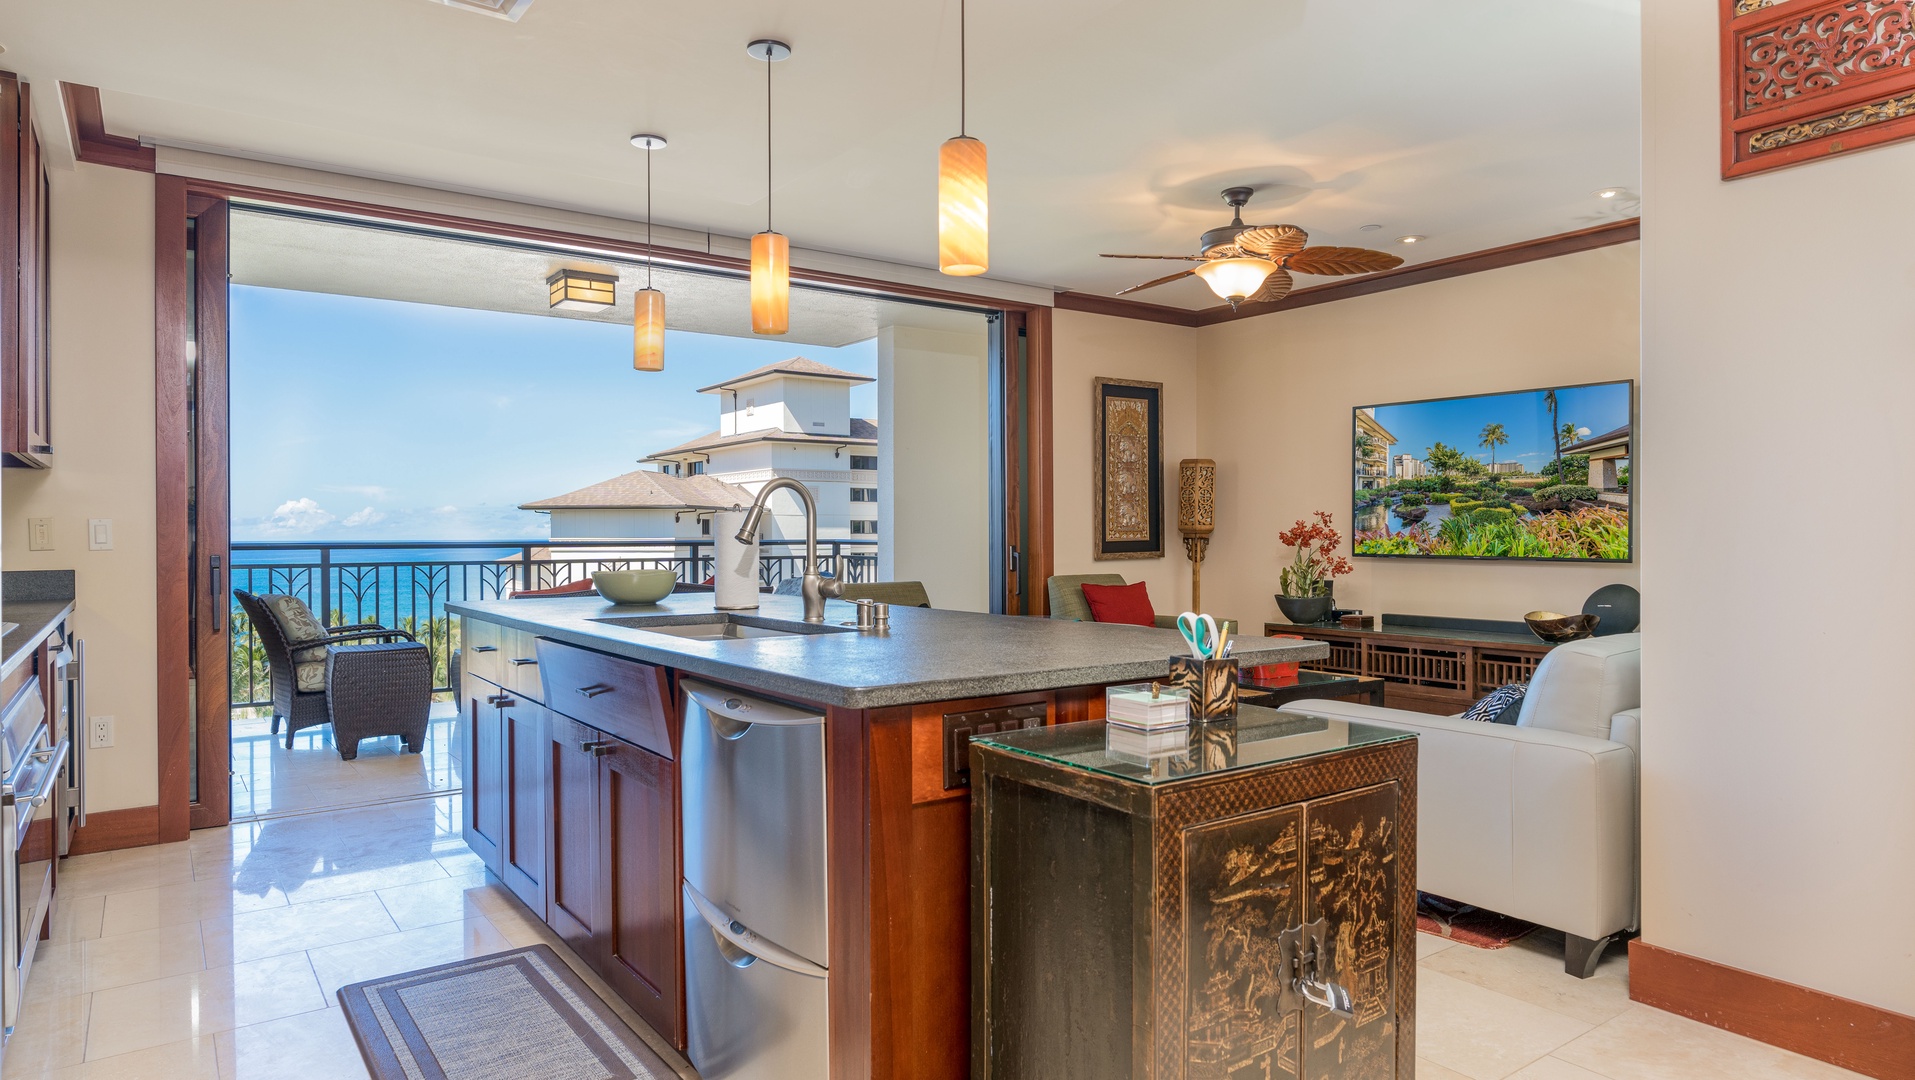 Kapolei Vacation Rentals, Ko Olina Beach Villas O905 - You will have a bright welcoming kitchen with all the amenities for a comfortable stay.